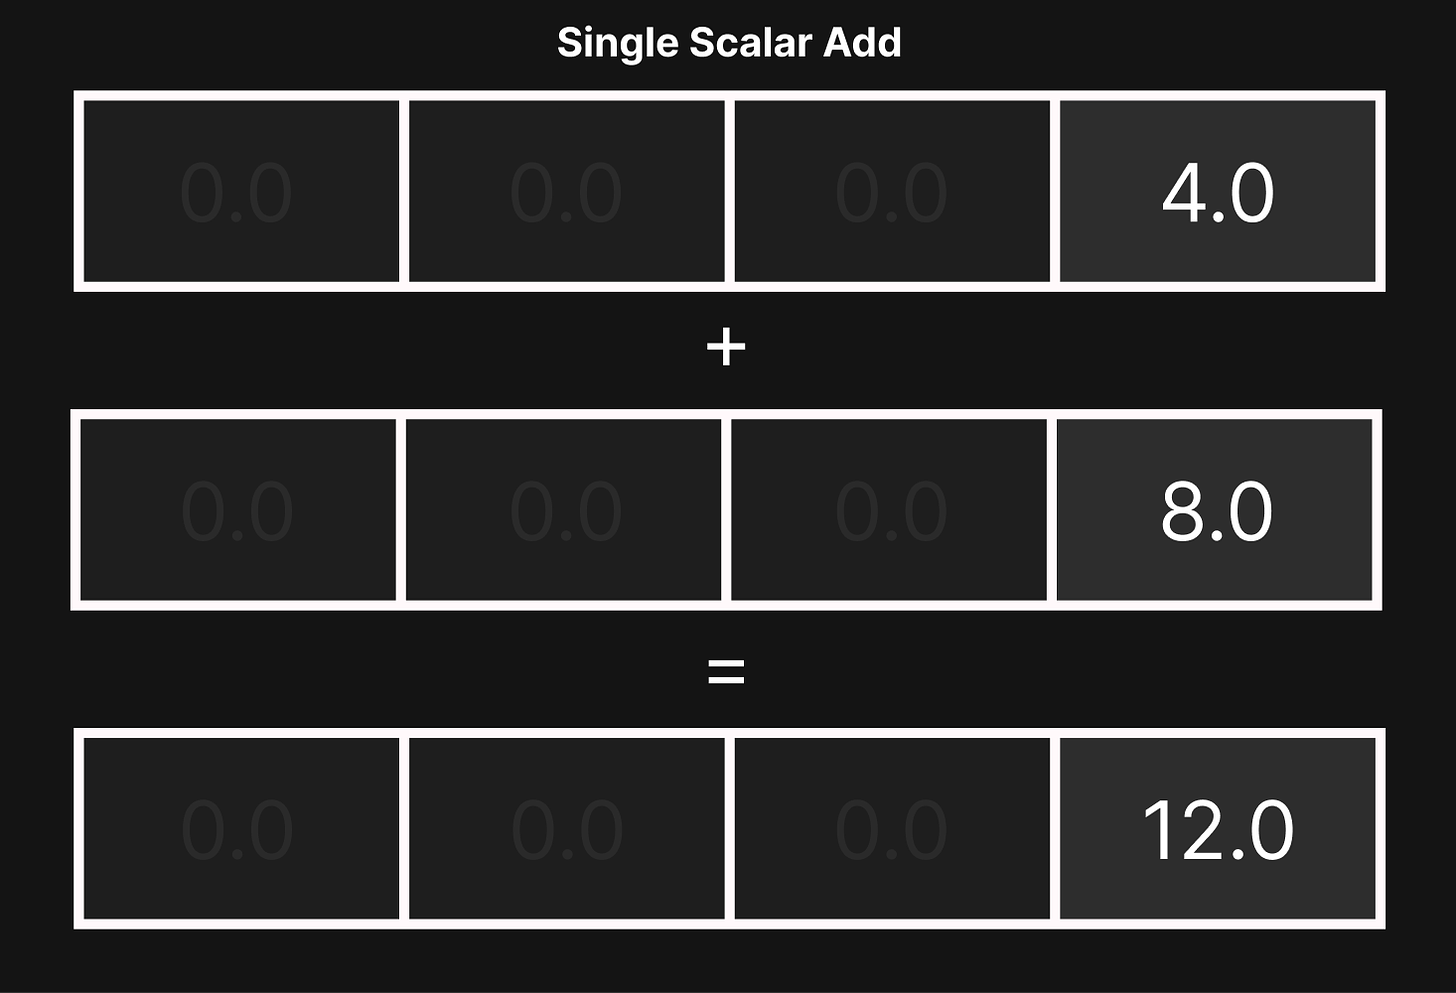 Example of a single scalar addition